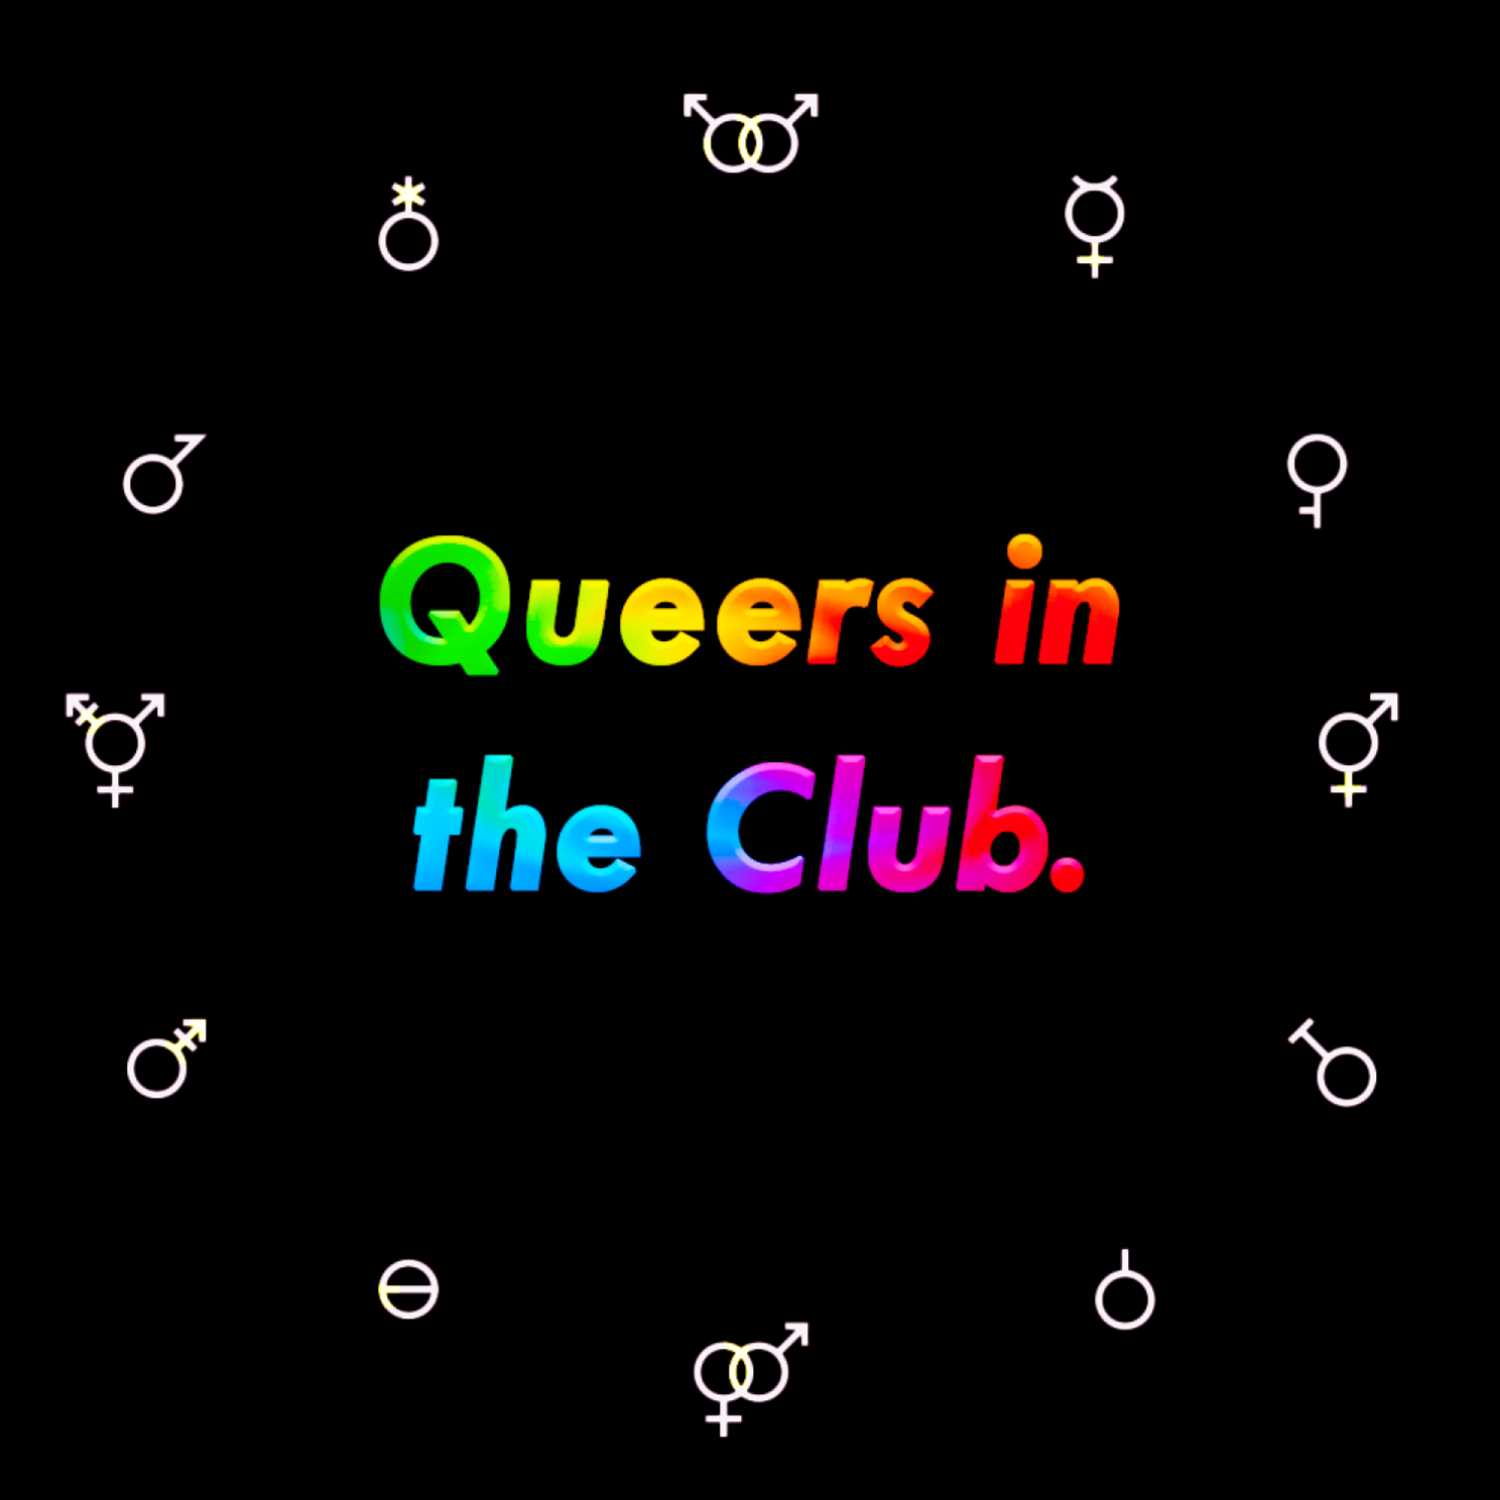 Queers in the Club